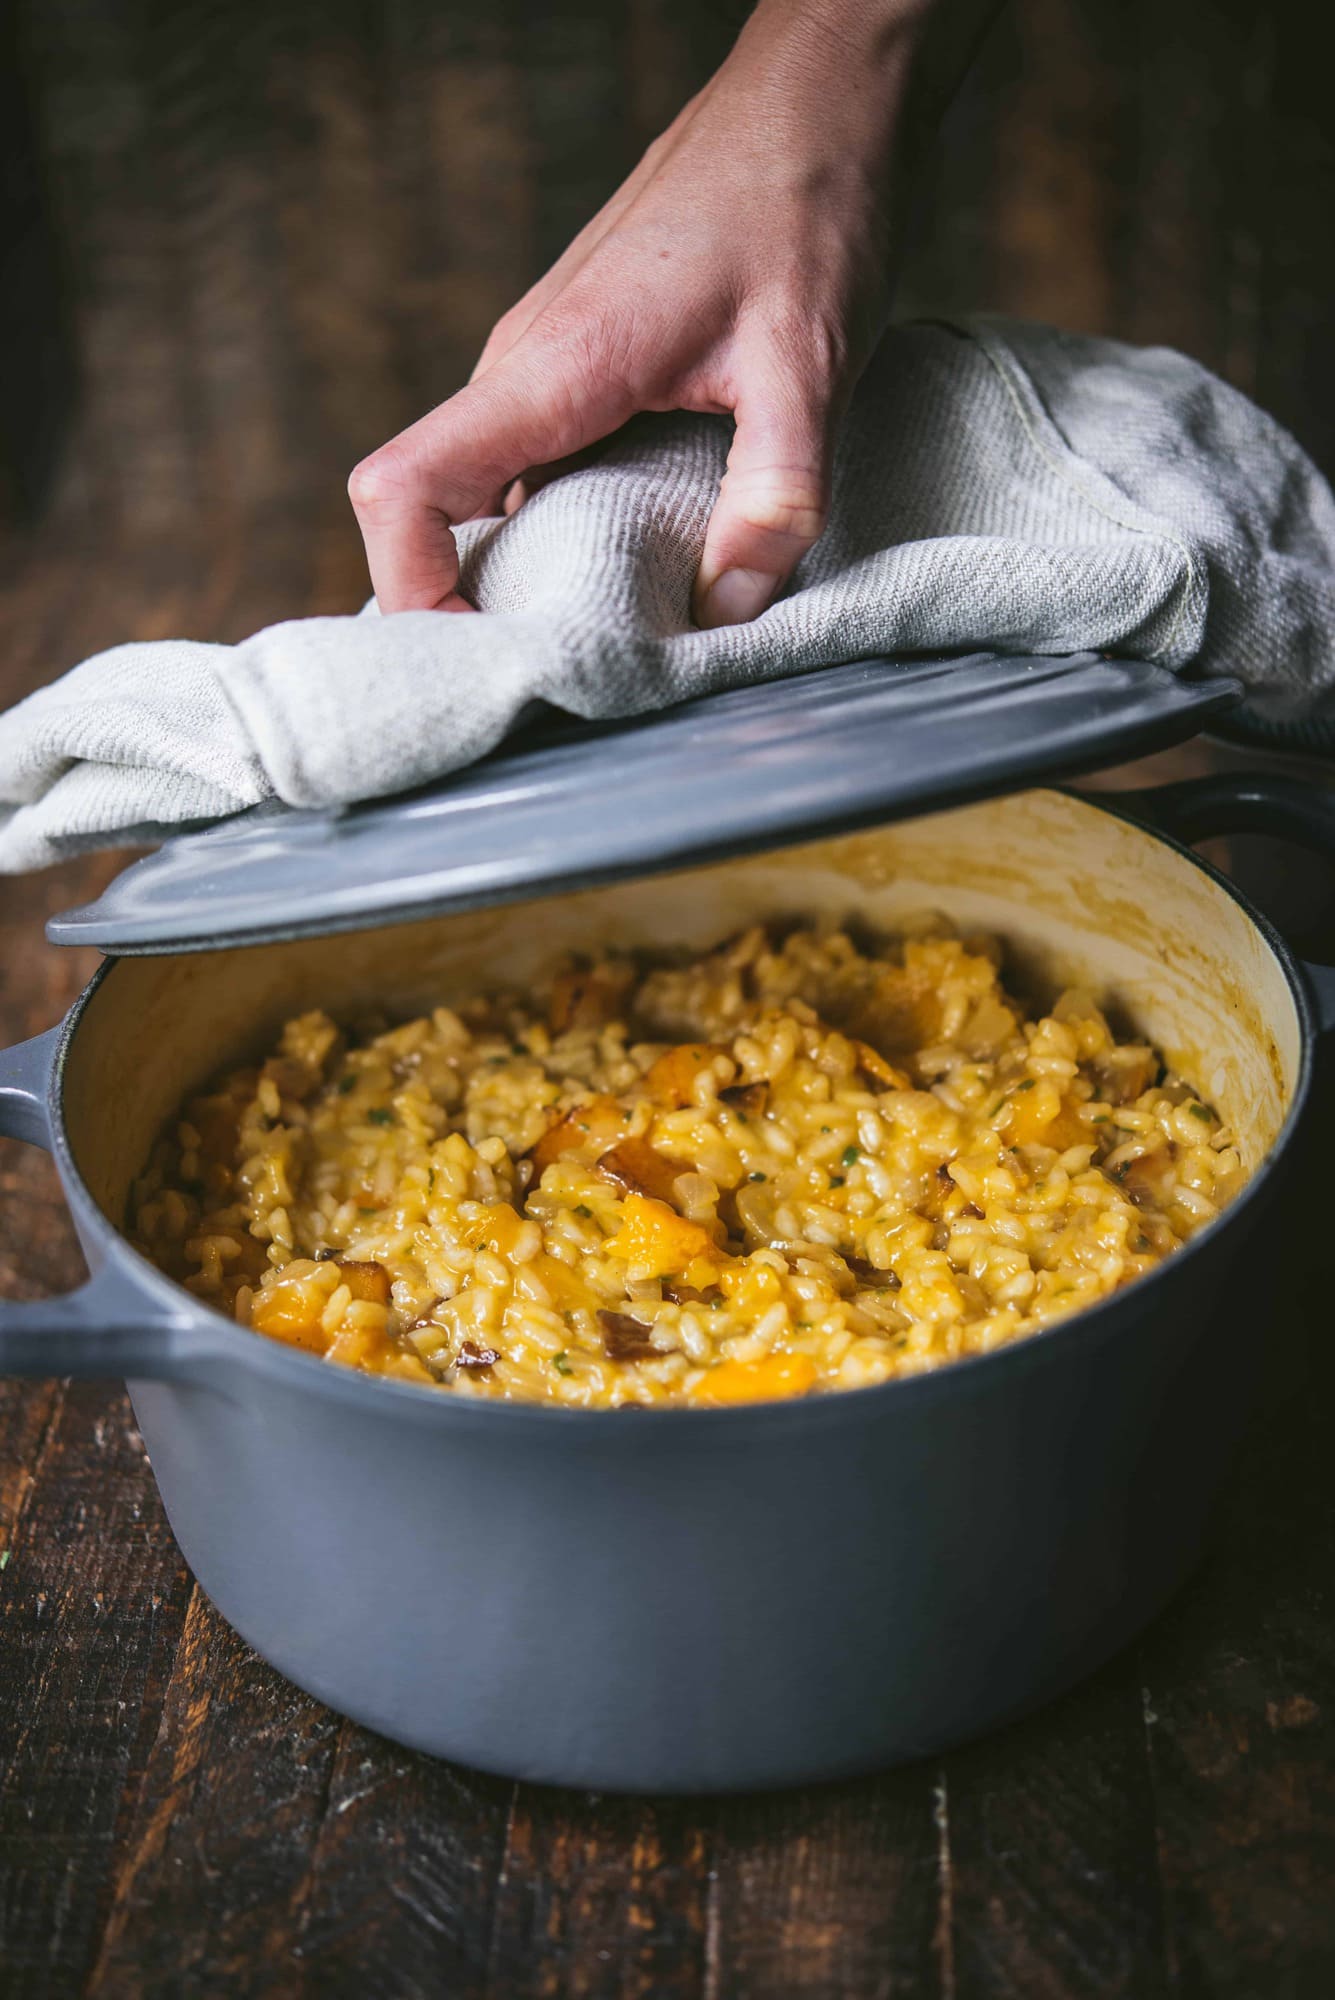 Hand opening pot of butternut squash risotto